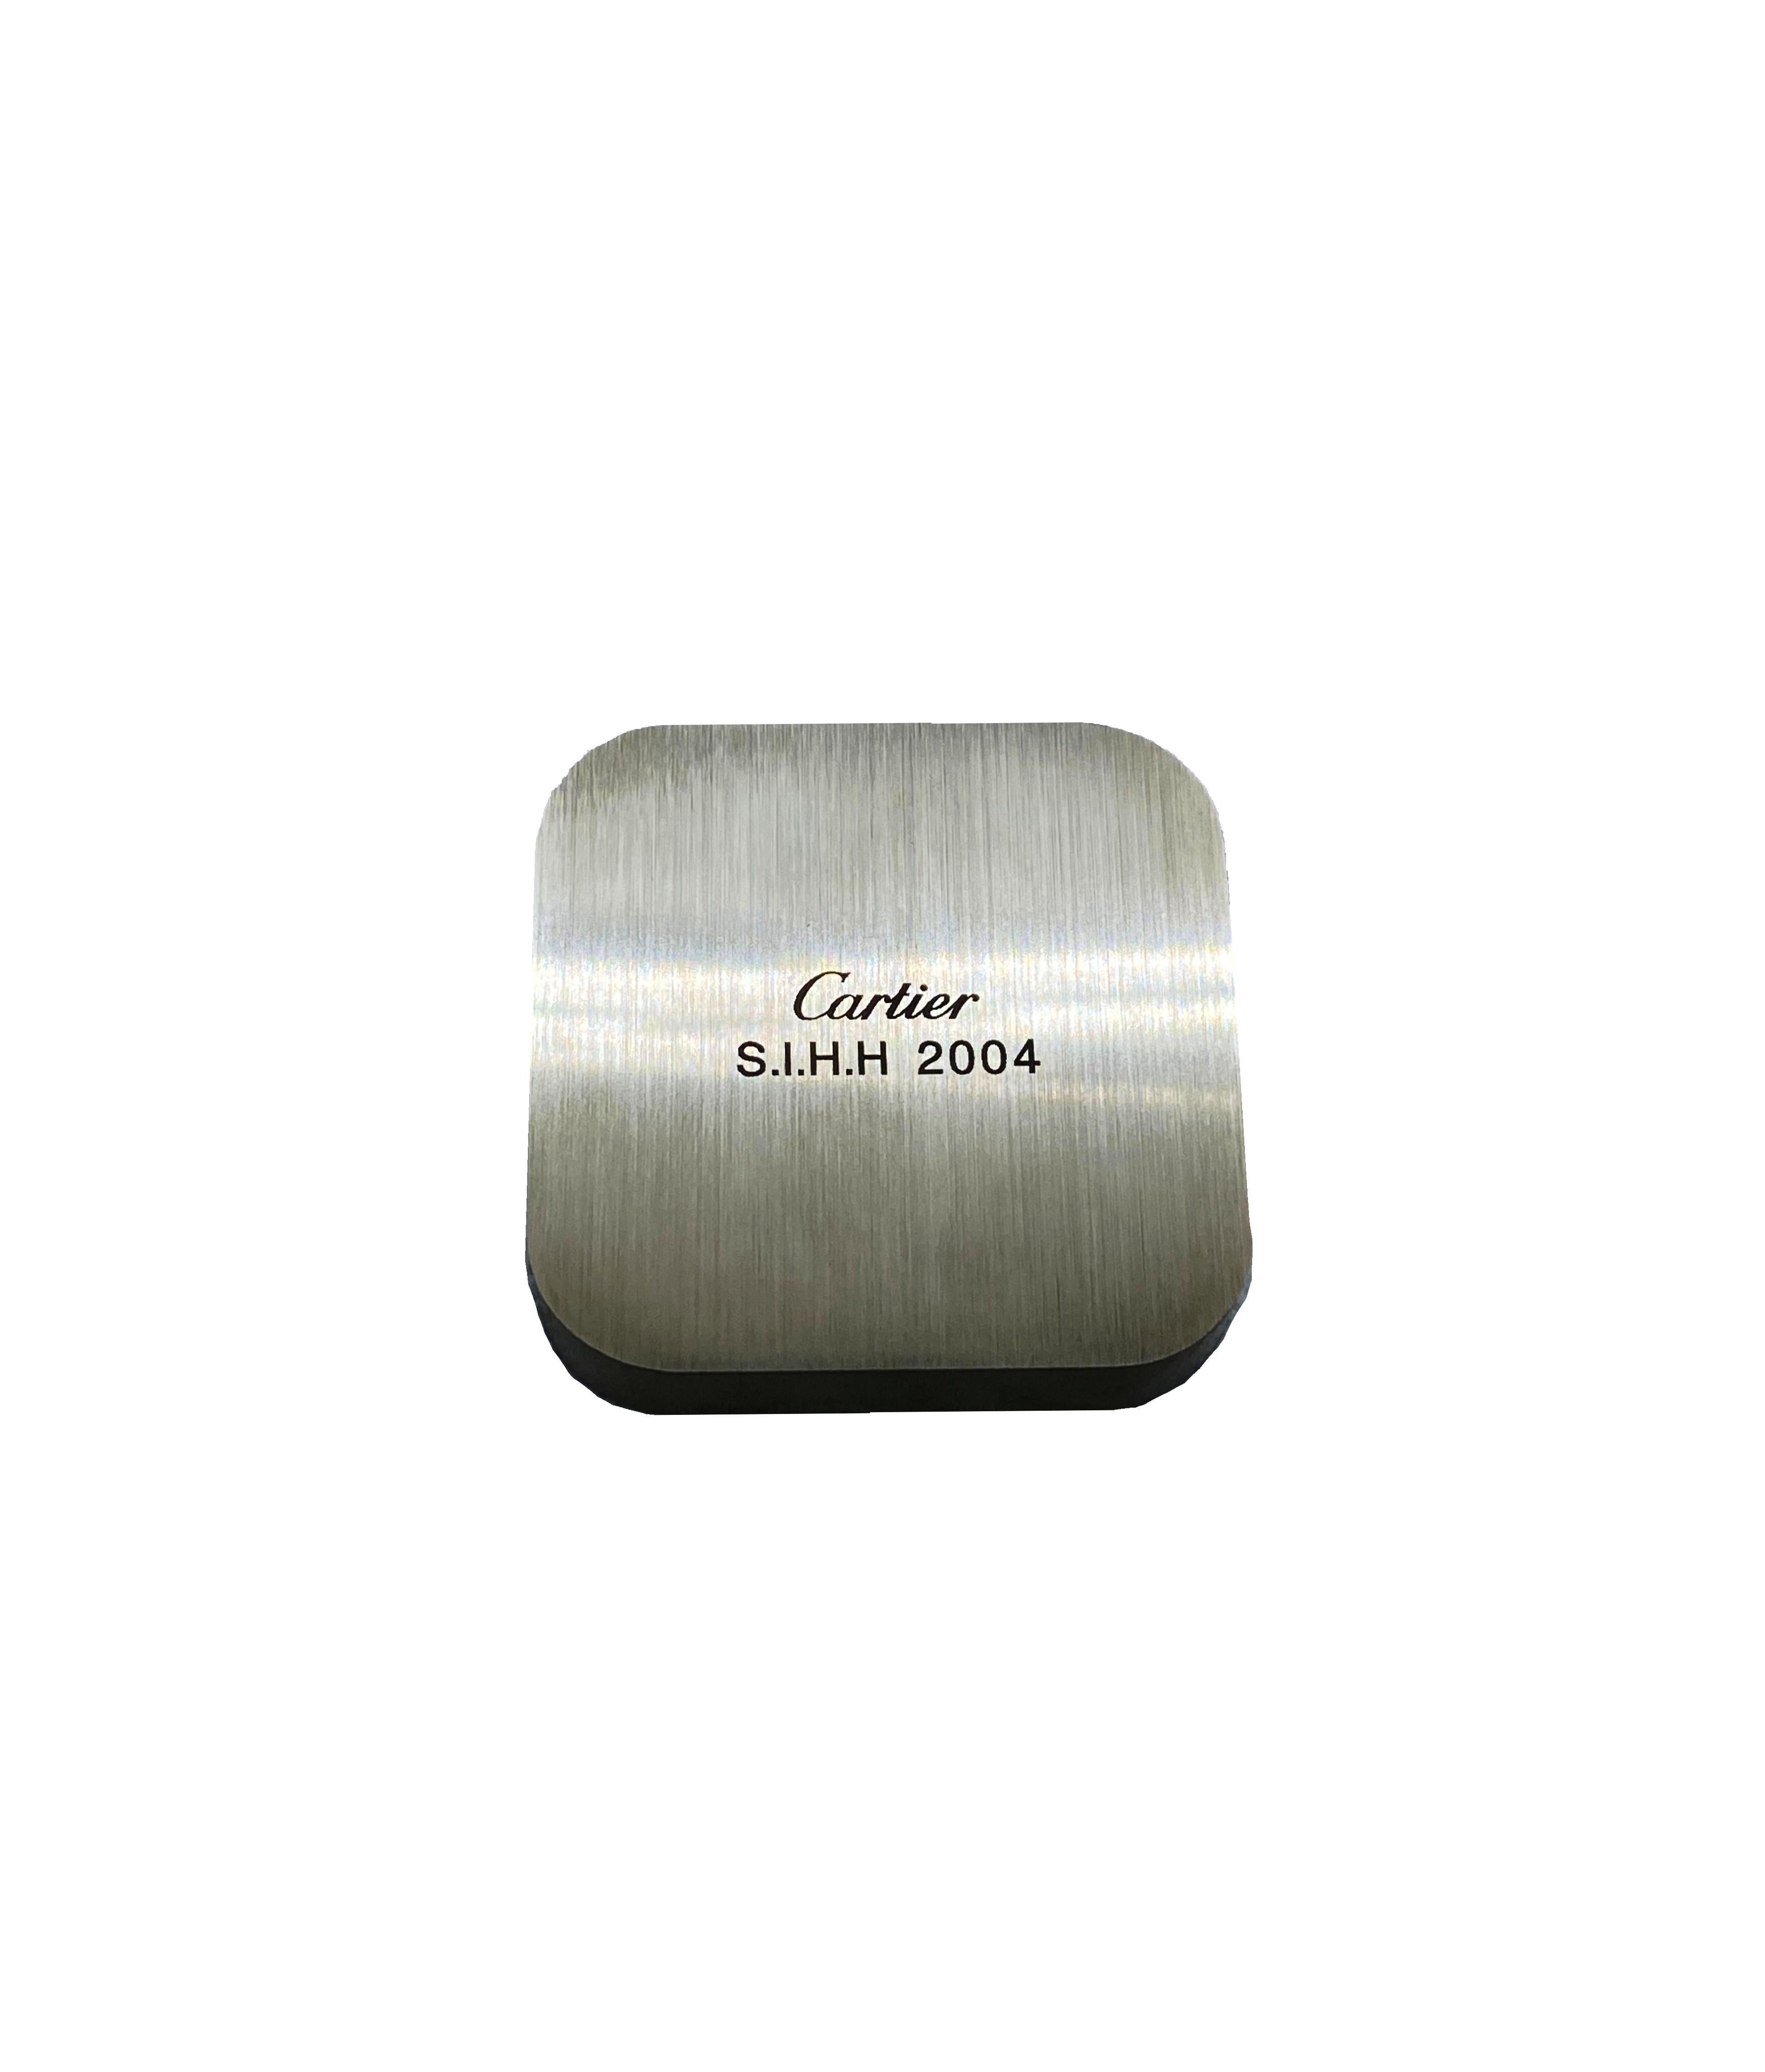 CARTIER Santos Palladium Compass
A very rare and limited piece 
Produced for the SIHH 2004 in Geneva, Switzerland and only made available to a very few, hand-selected Cartier clients
Ideal gift for a Cartier aficionado and collector
Brass dial with